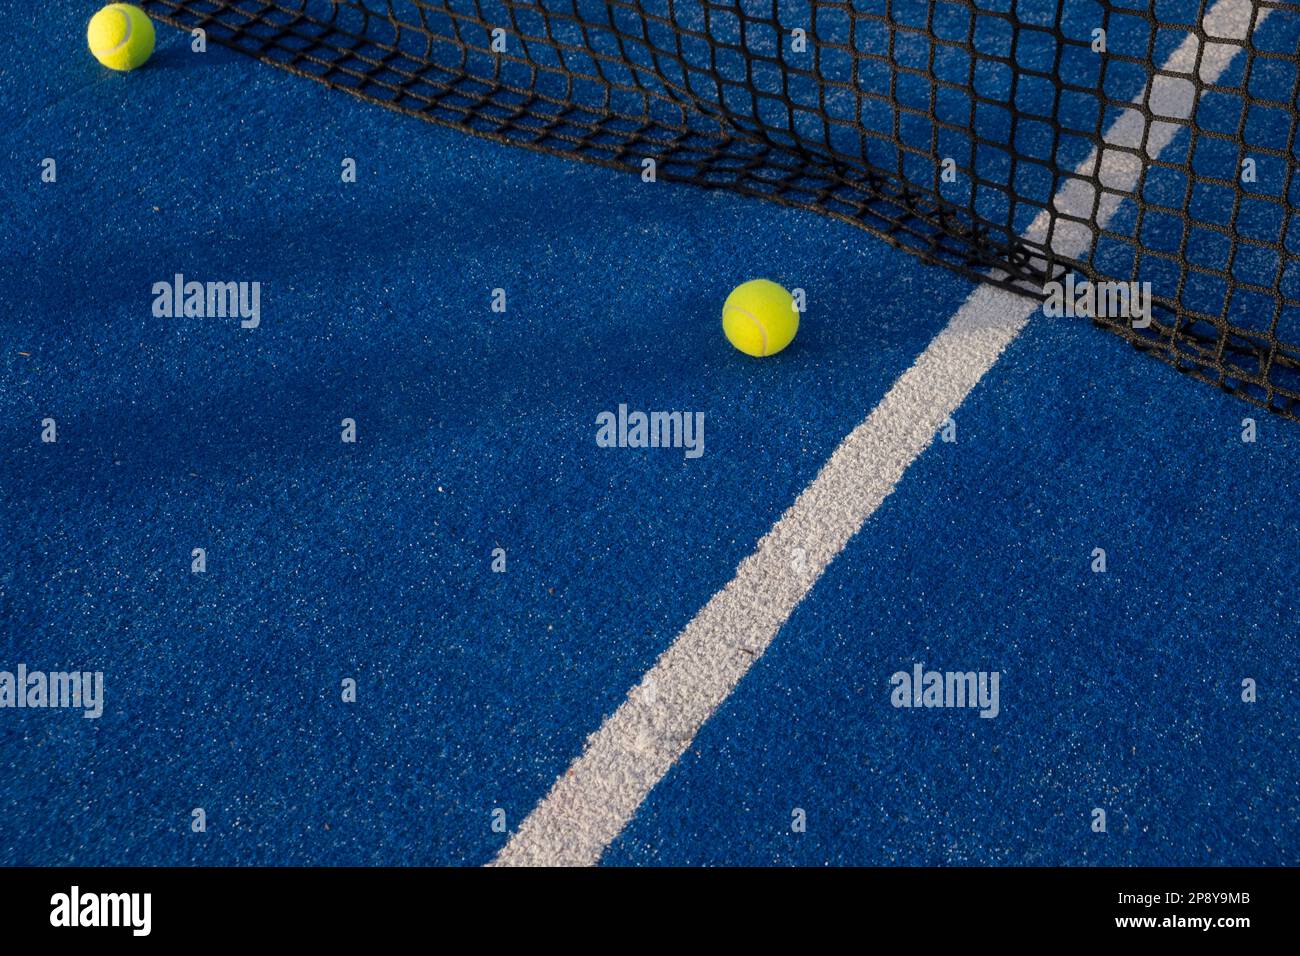 Paddle tennis ball near the net of a blue court Stock Photo